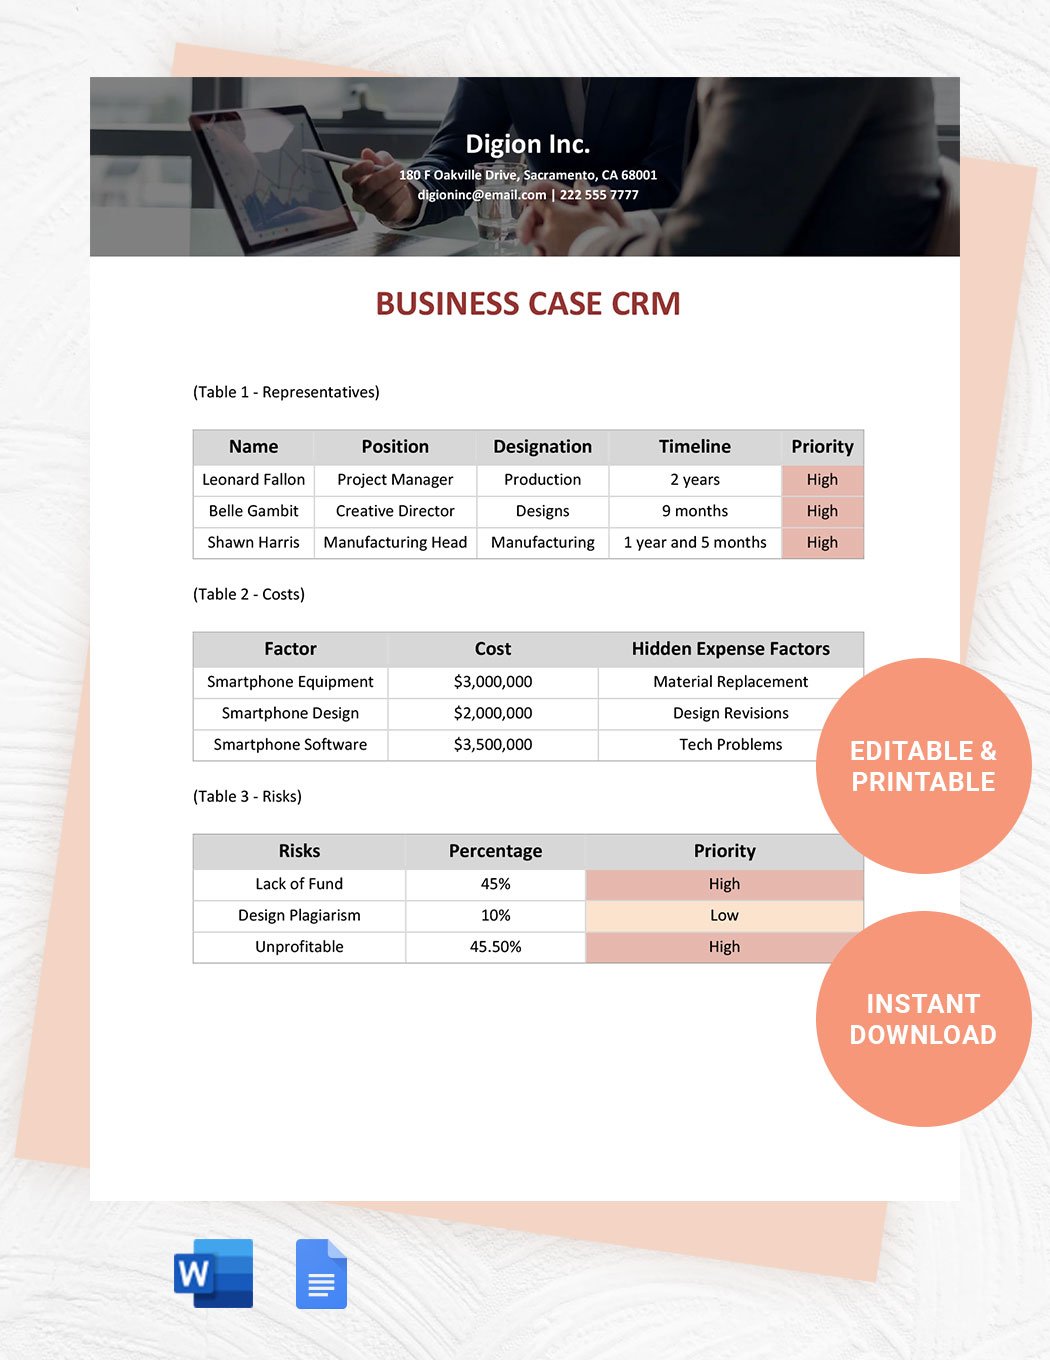 Business Case CRM Template